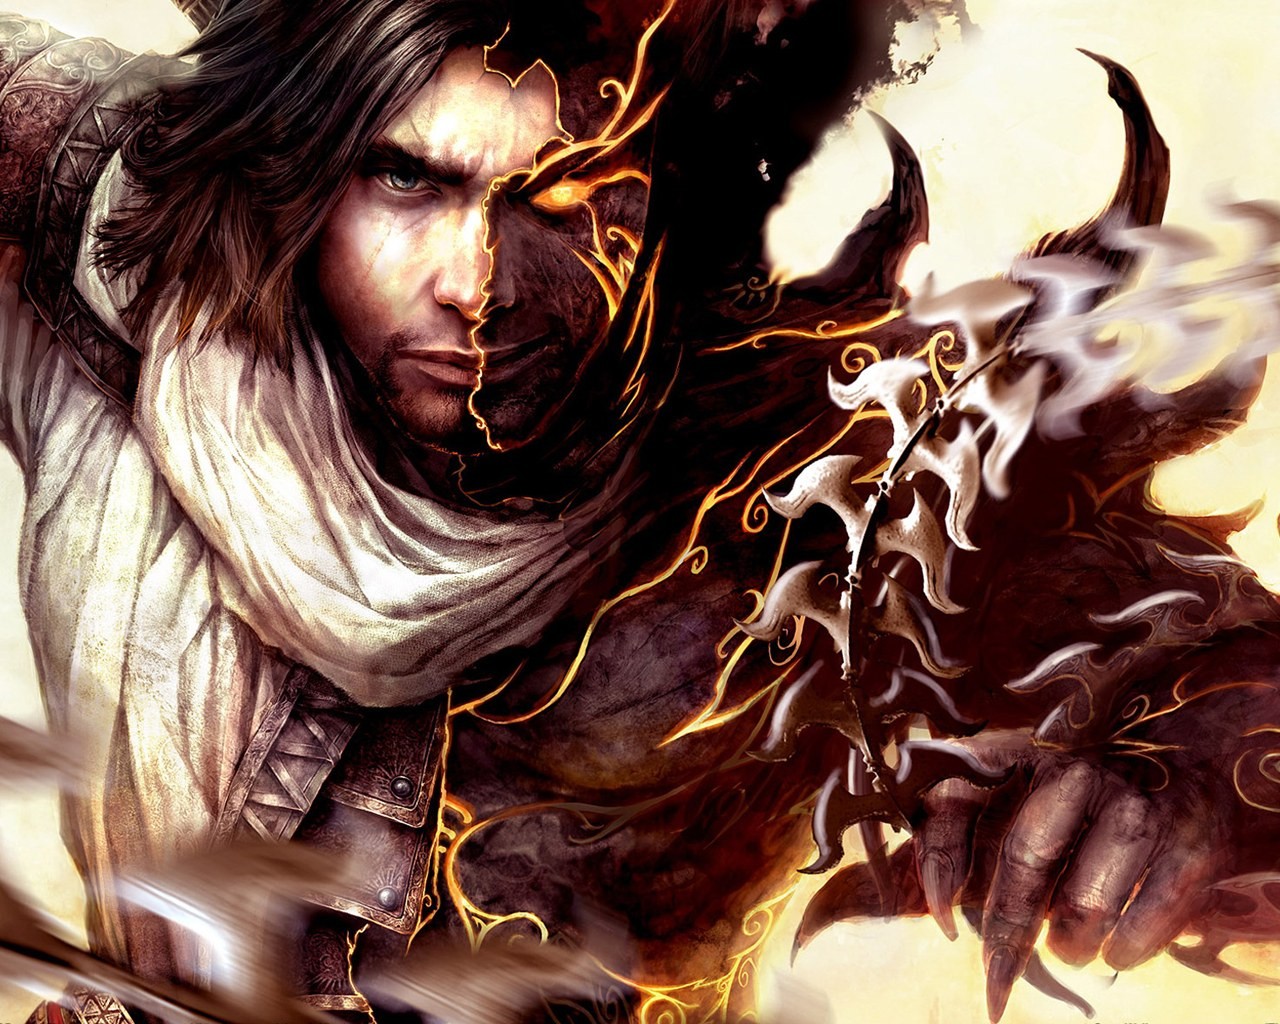 Prince of Persia full range of wallpapers #21 - 1280x1024